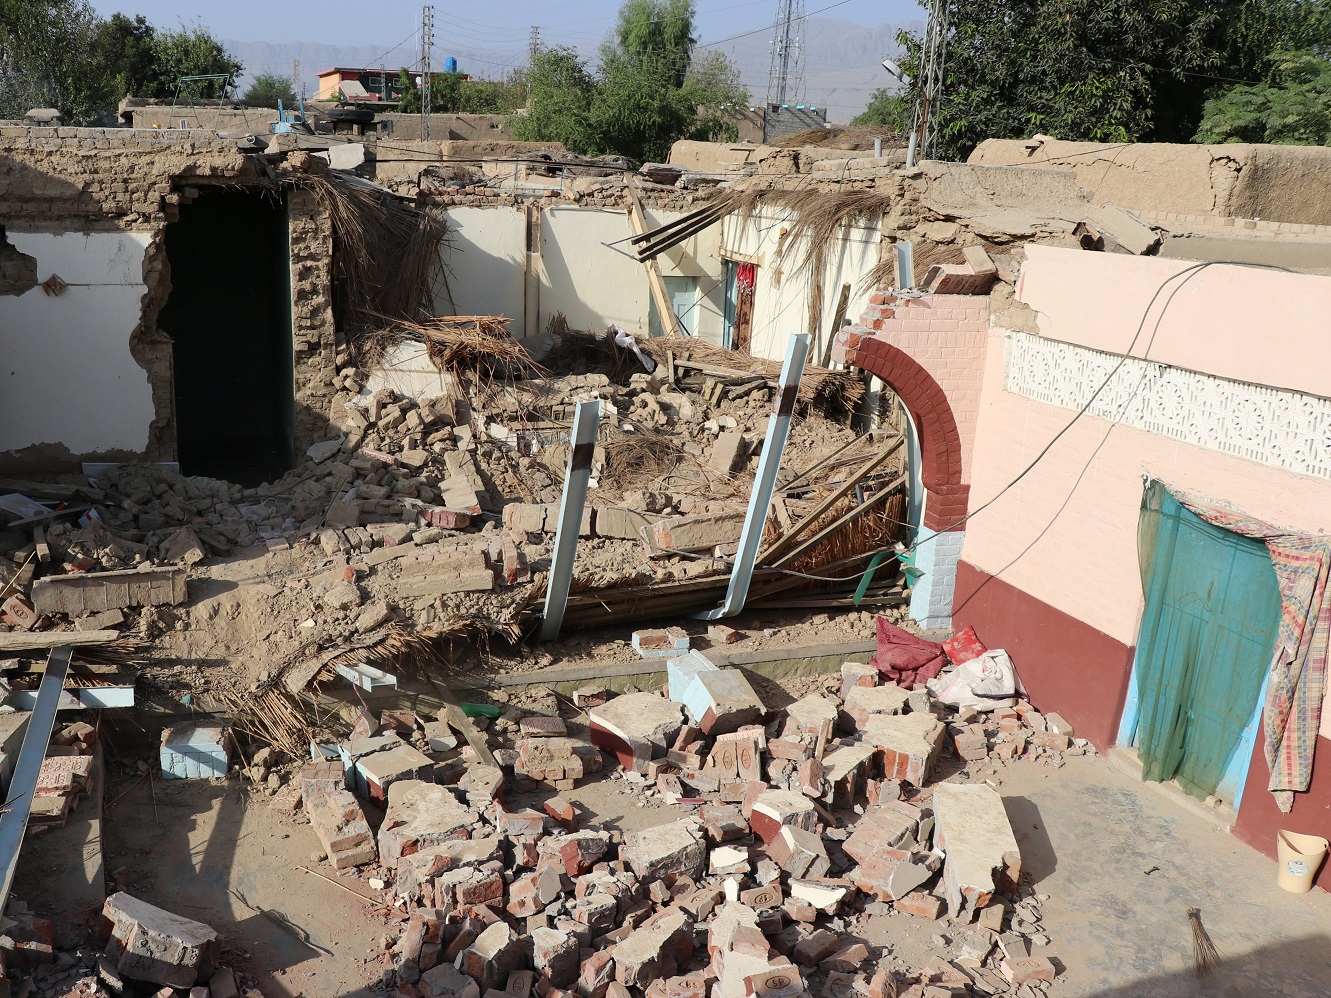 Many houses were destroyed by the earthquake in Pakistan